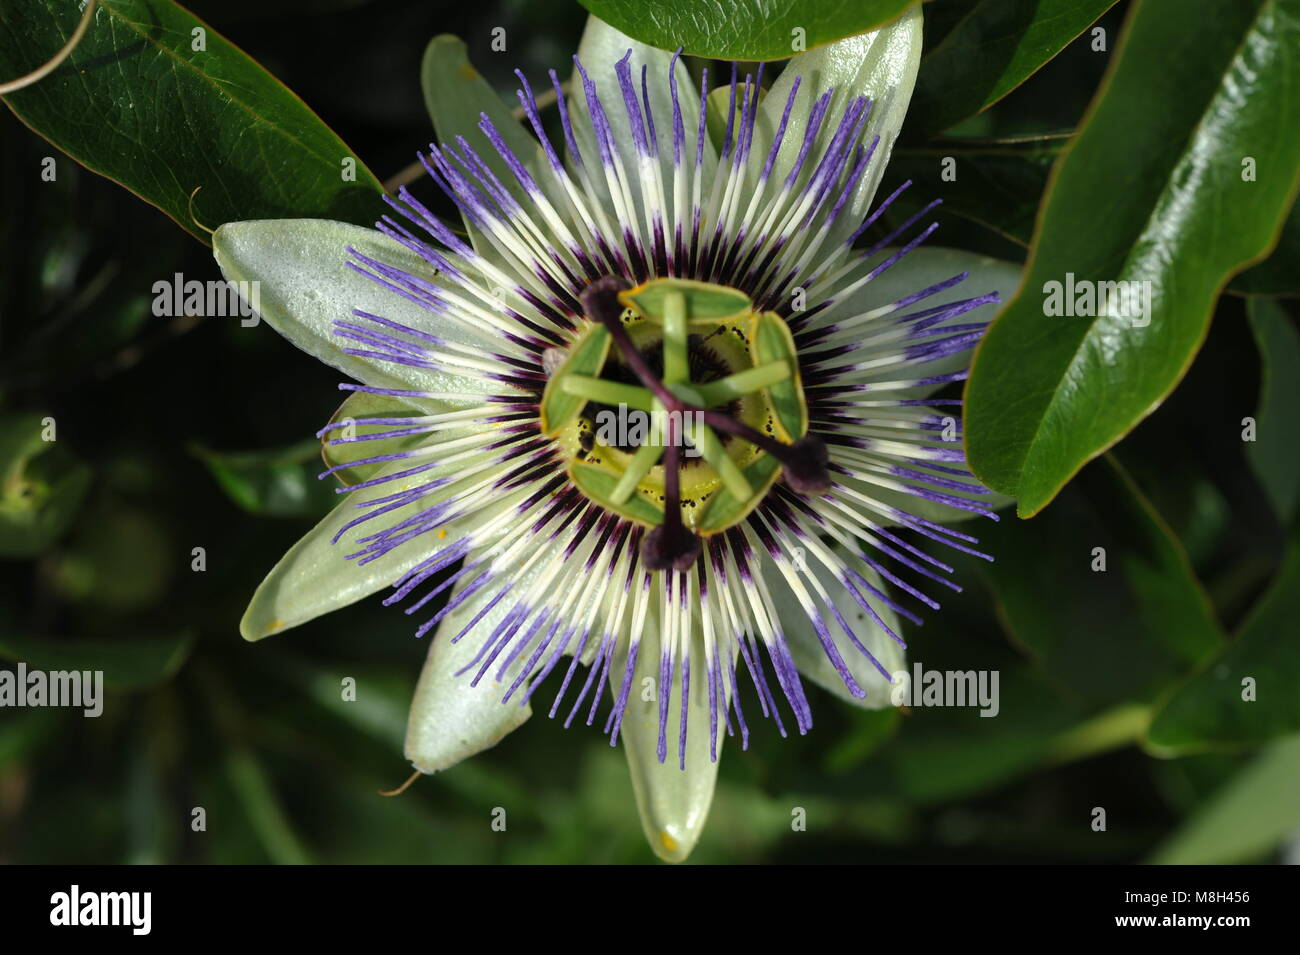 Passion flower close up  showing symmetry and purple and mauve  color patterning to attract pollinators Stock Photo